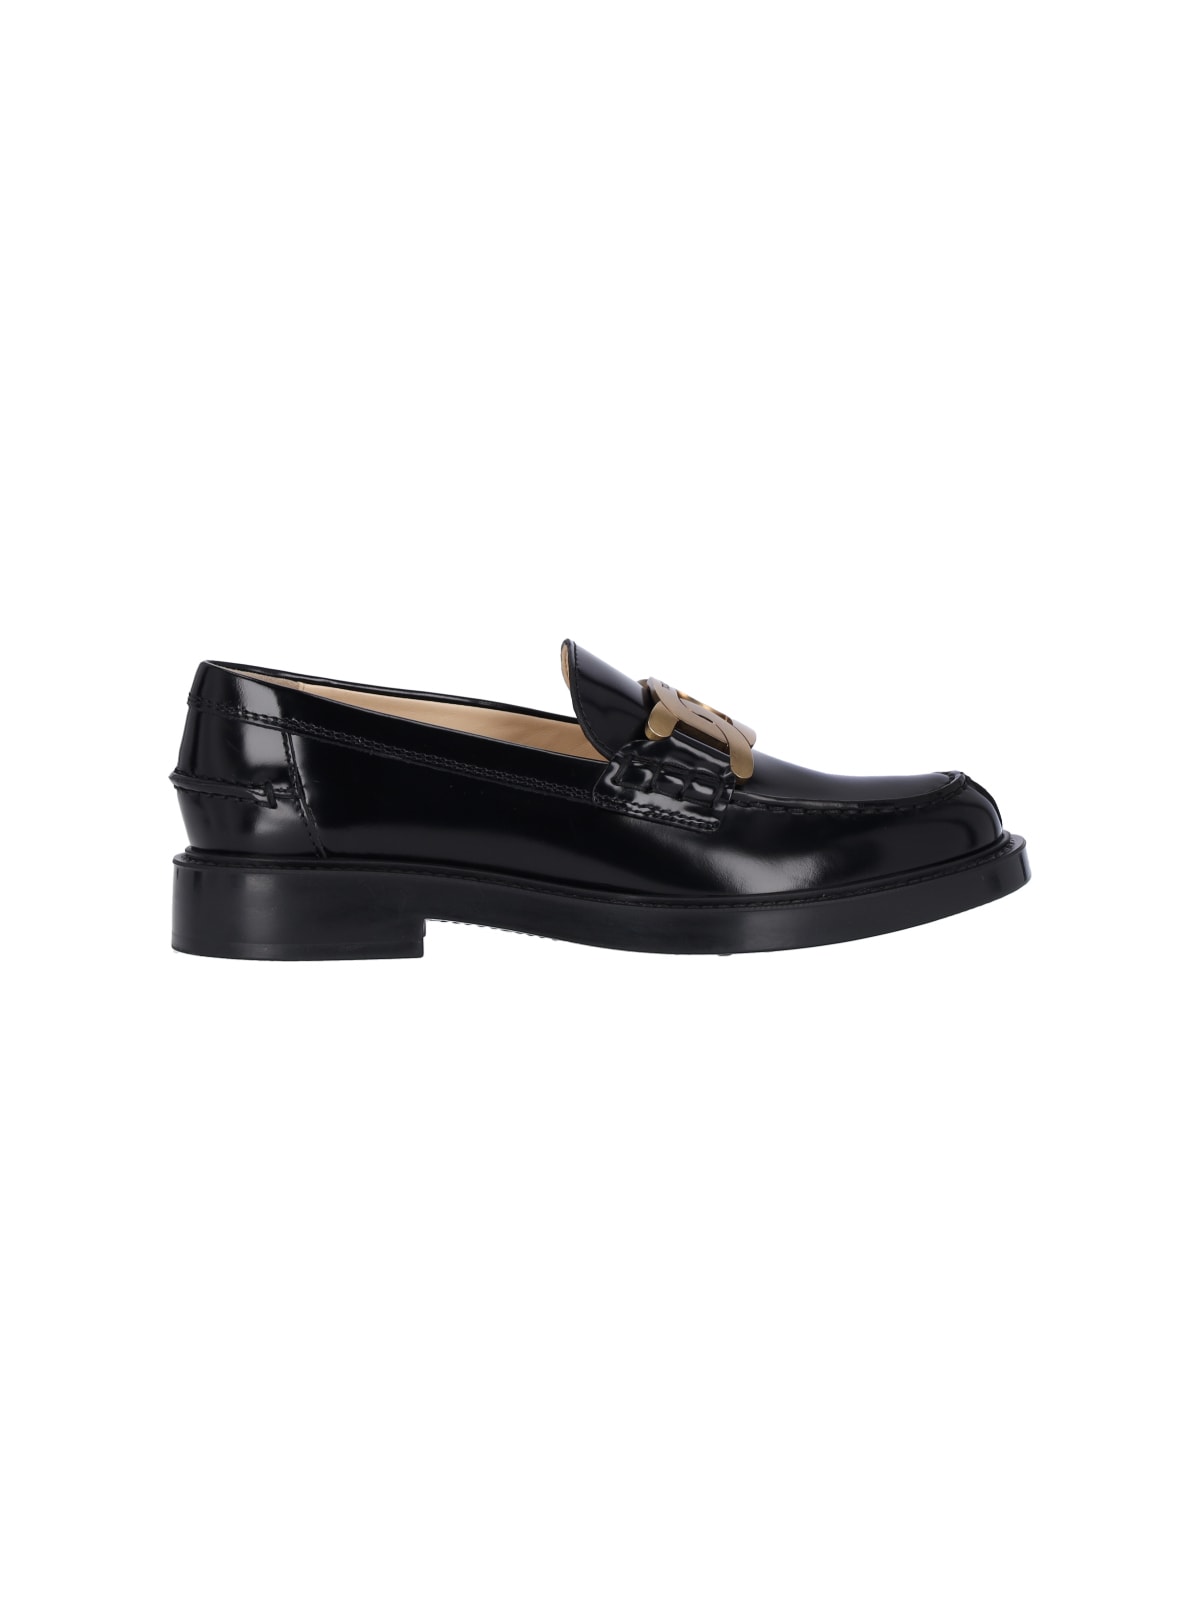 TOD'S BUCKLE DETAIL LOAFERS